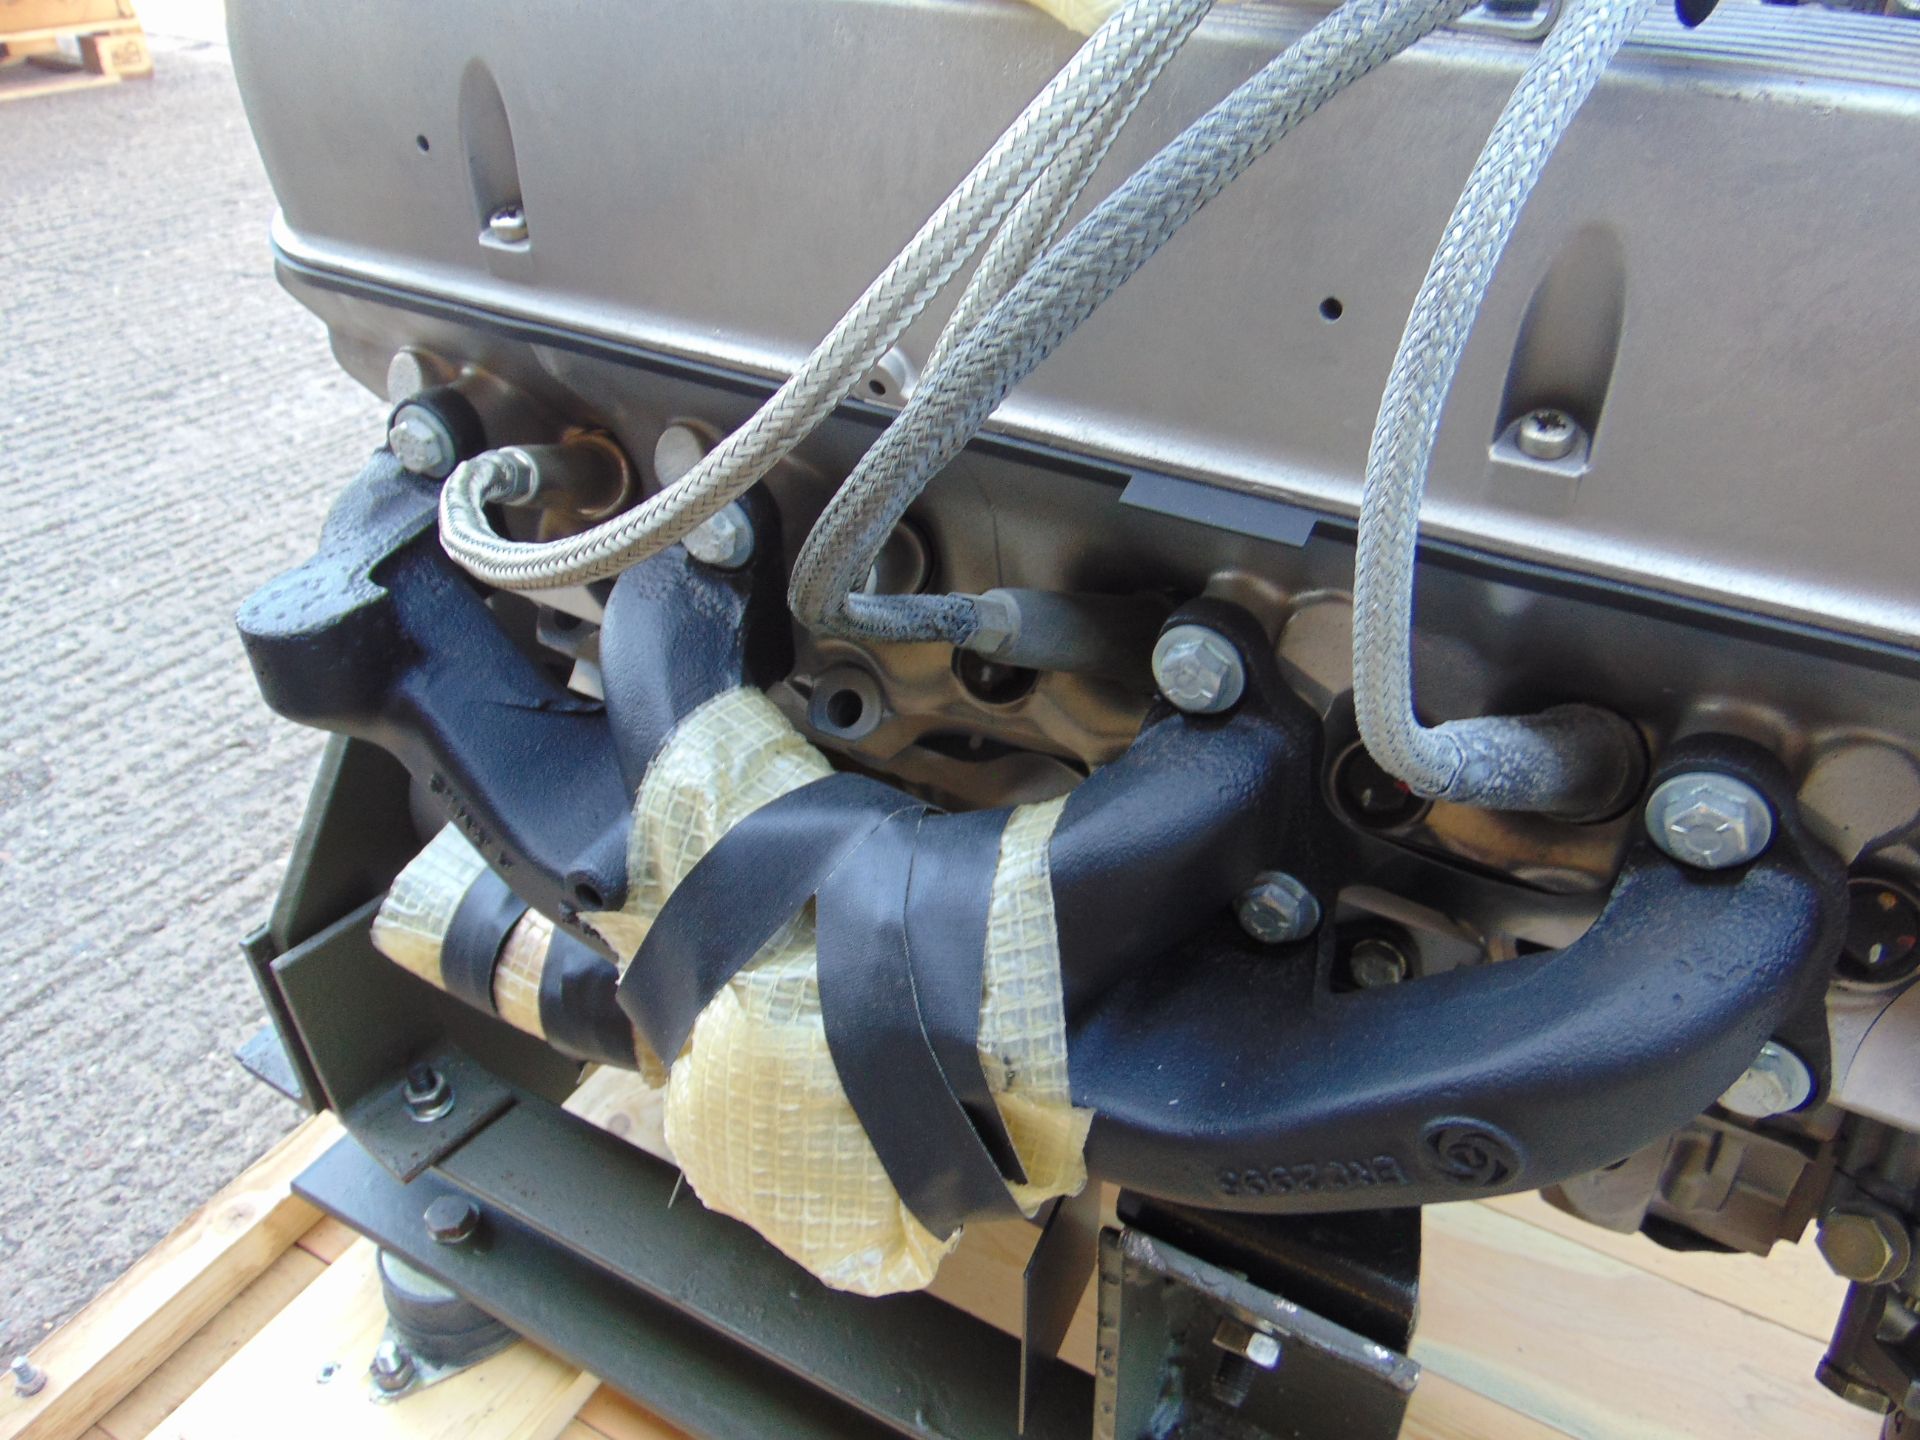 Fully Reconditioned Land Rover V8 Engine c/w all Accessories, as shown in Crate etc - Image 13 of 21